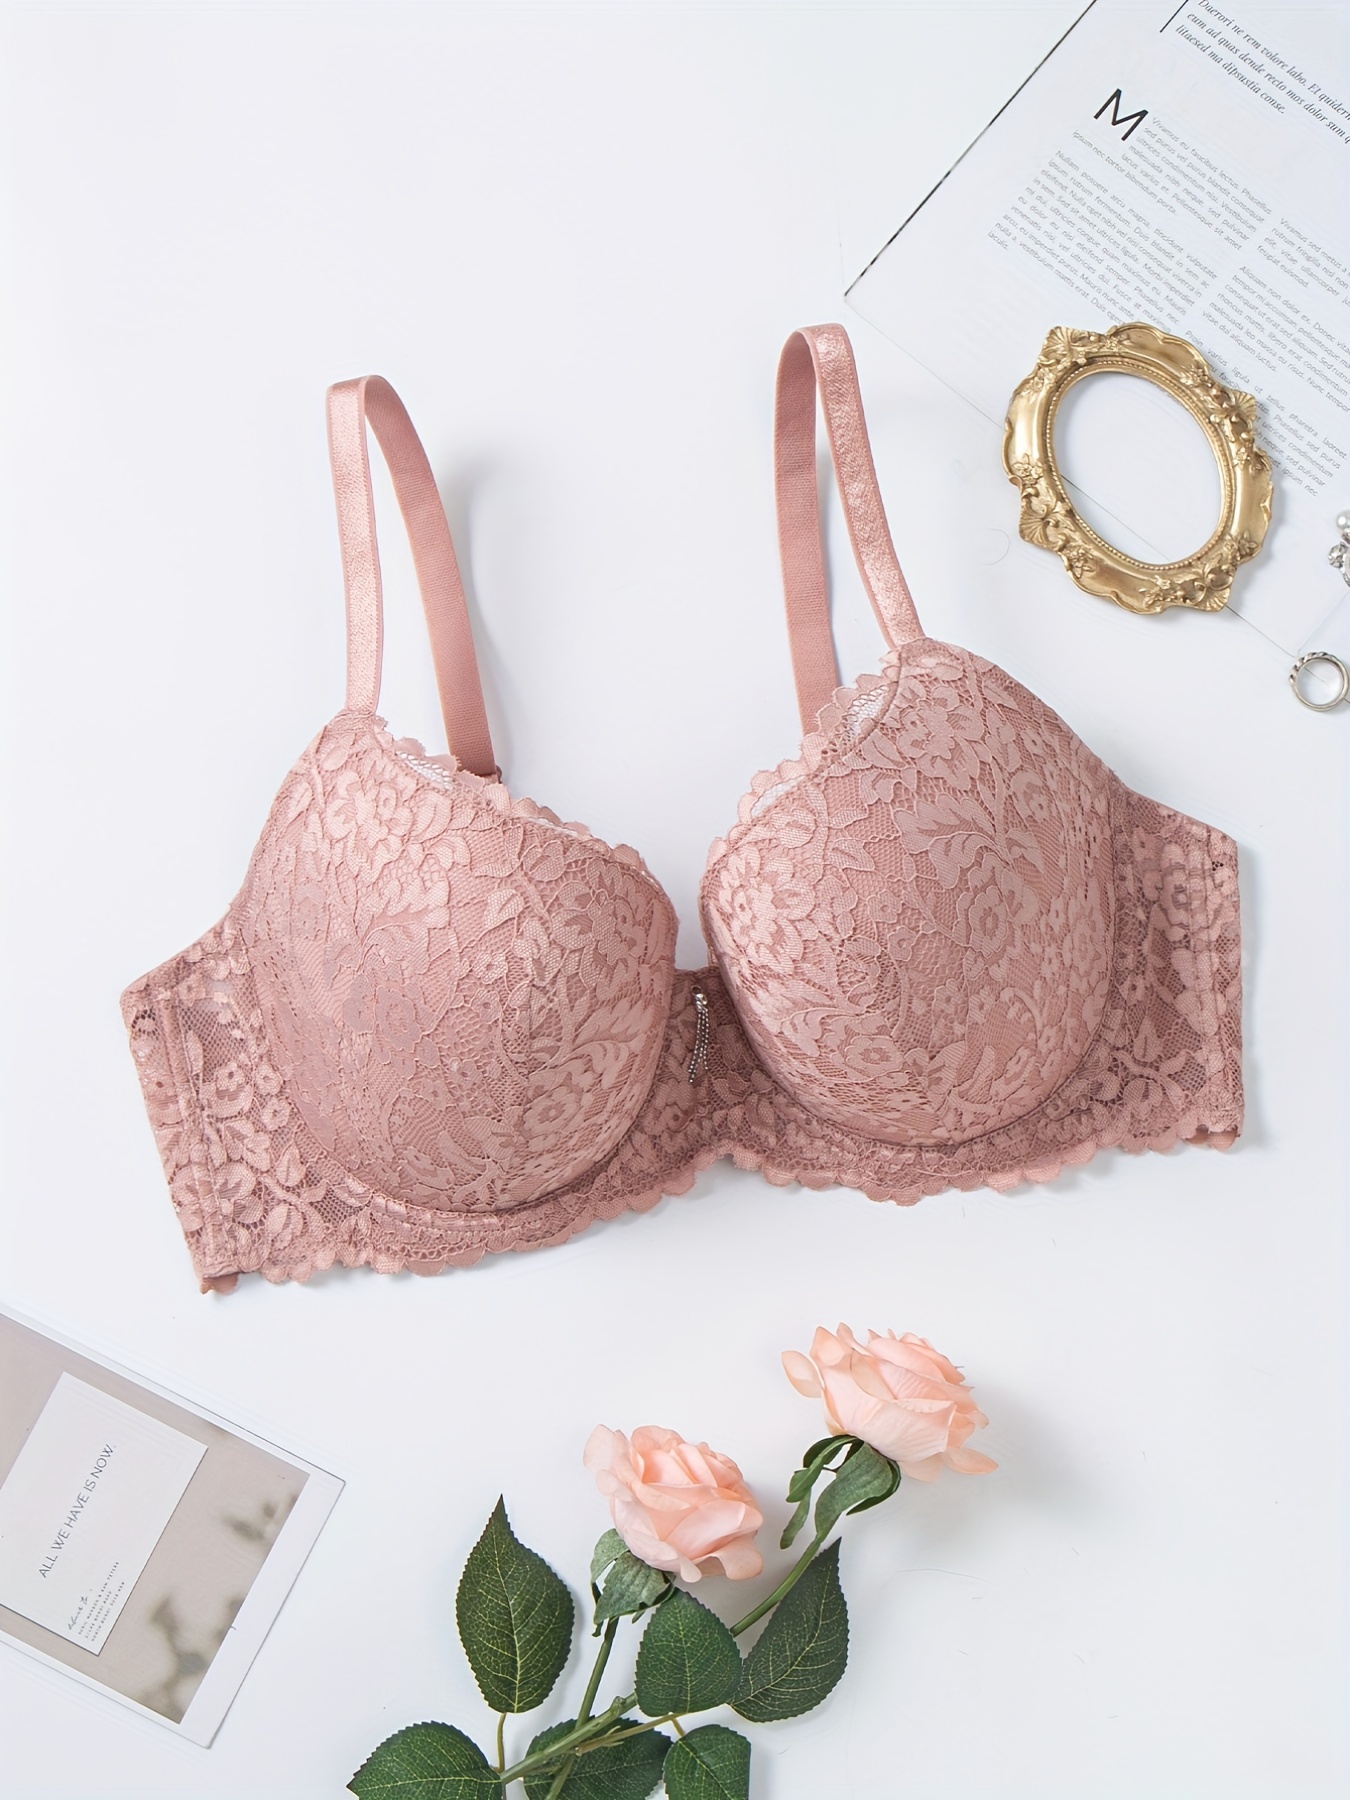  Womens Full Coverage Floral Lace Underwired Bra Plus Size  Non Padded Comfort Bra 42C Pink